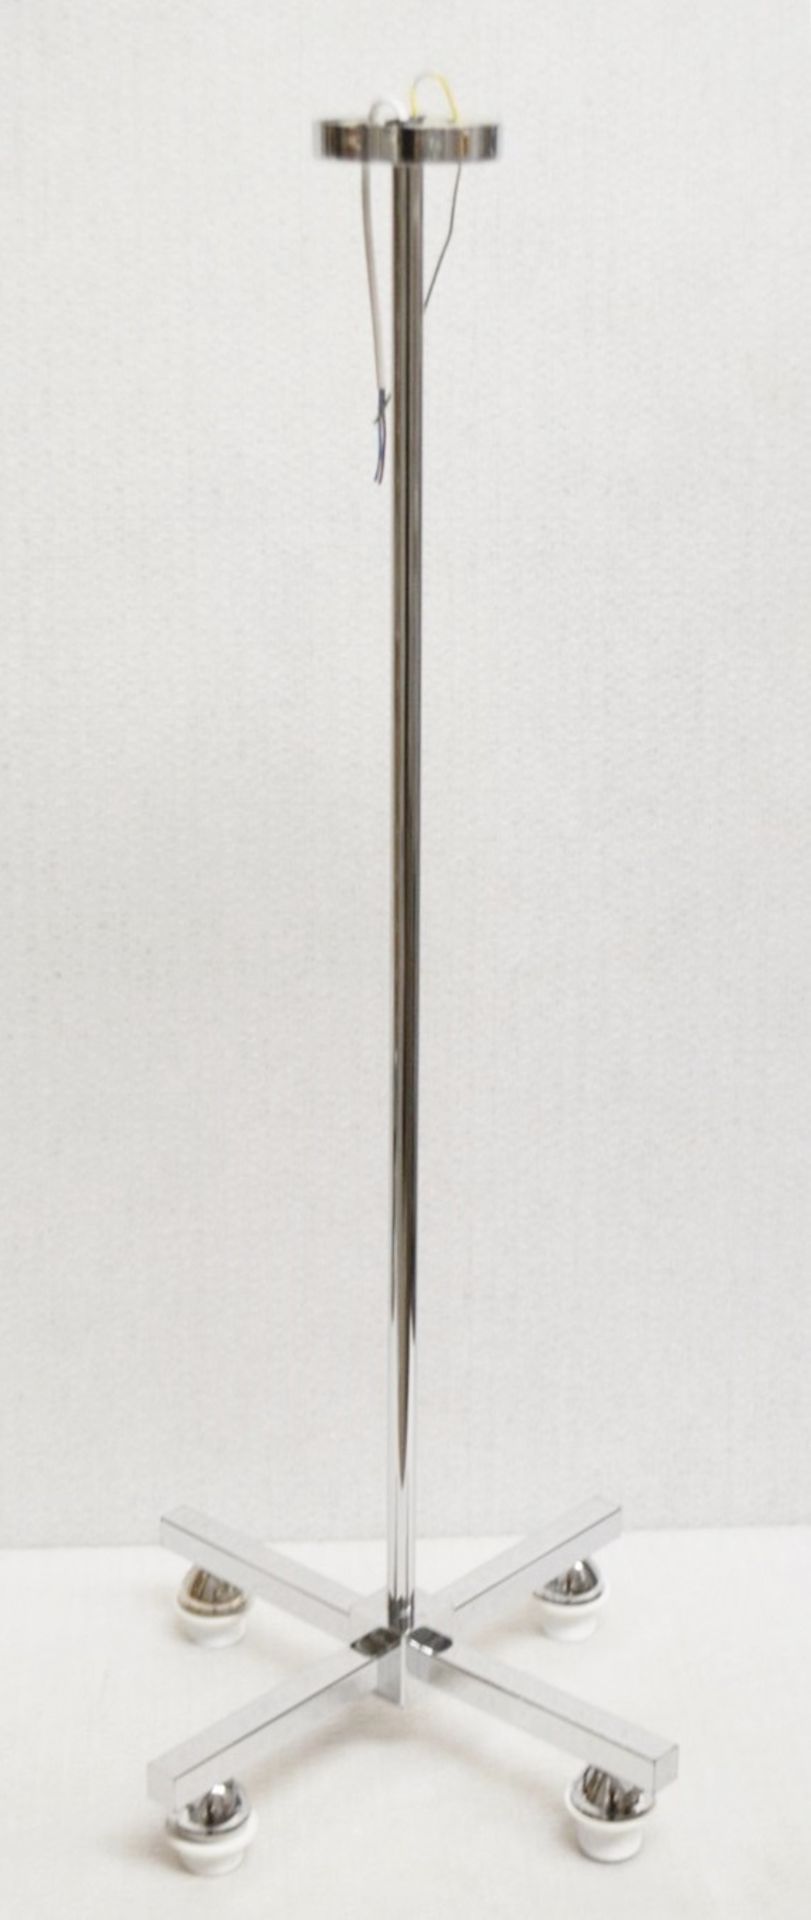 1 x CHELSOM 4-Arm 1-Metre Tall Ceiling Light Fitting In A Chrome Finish - Unused Stock - Dimensions: